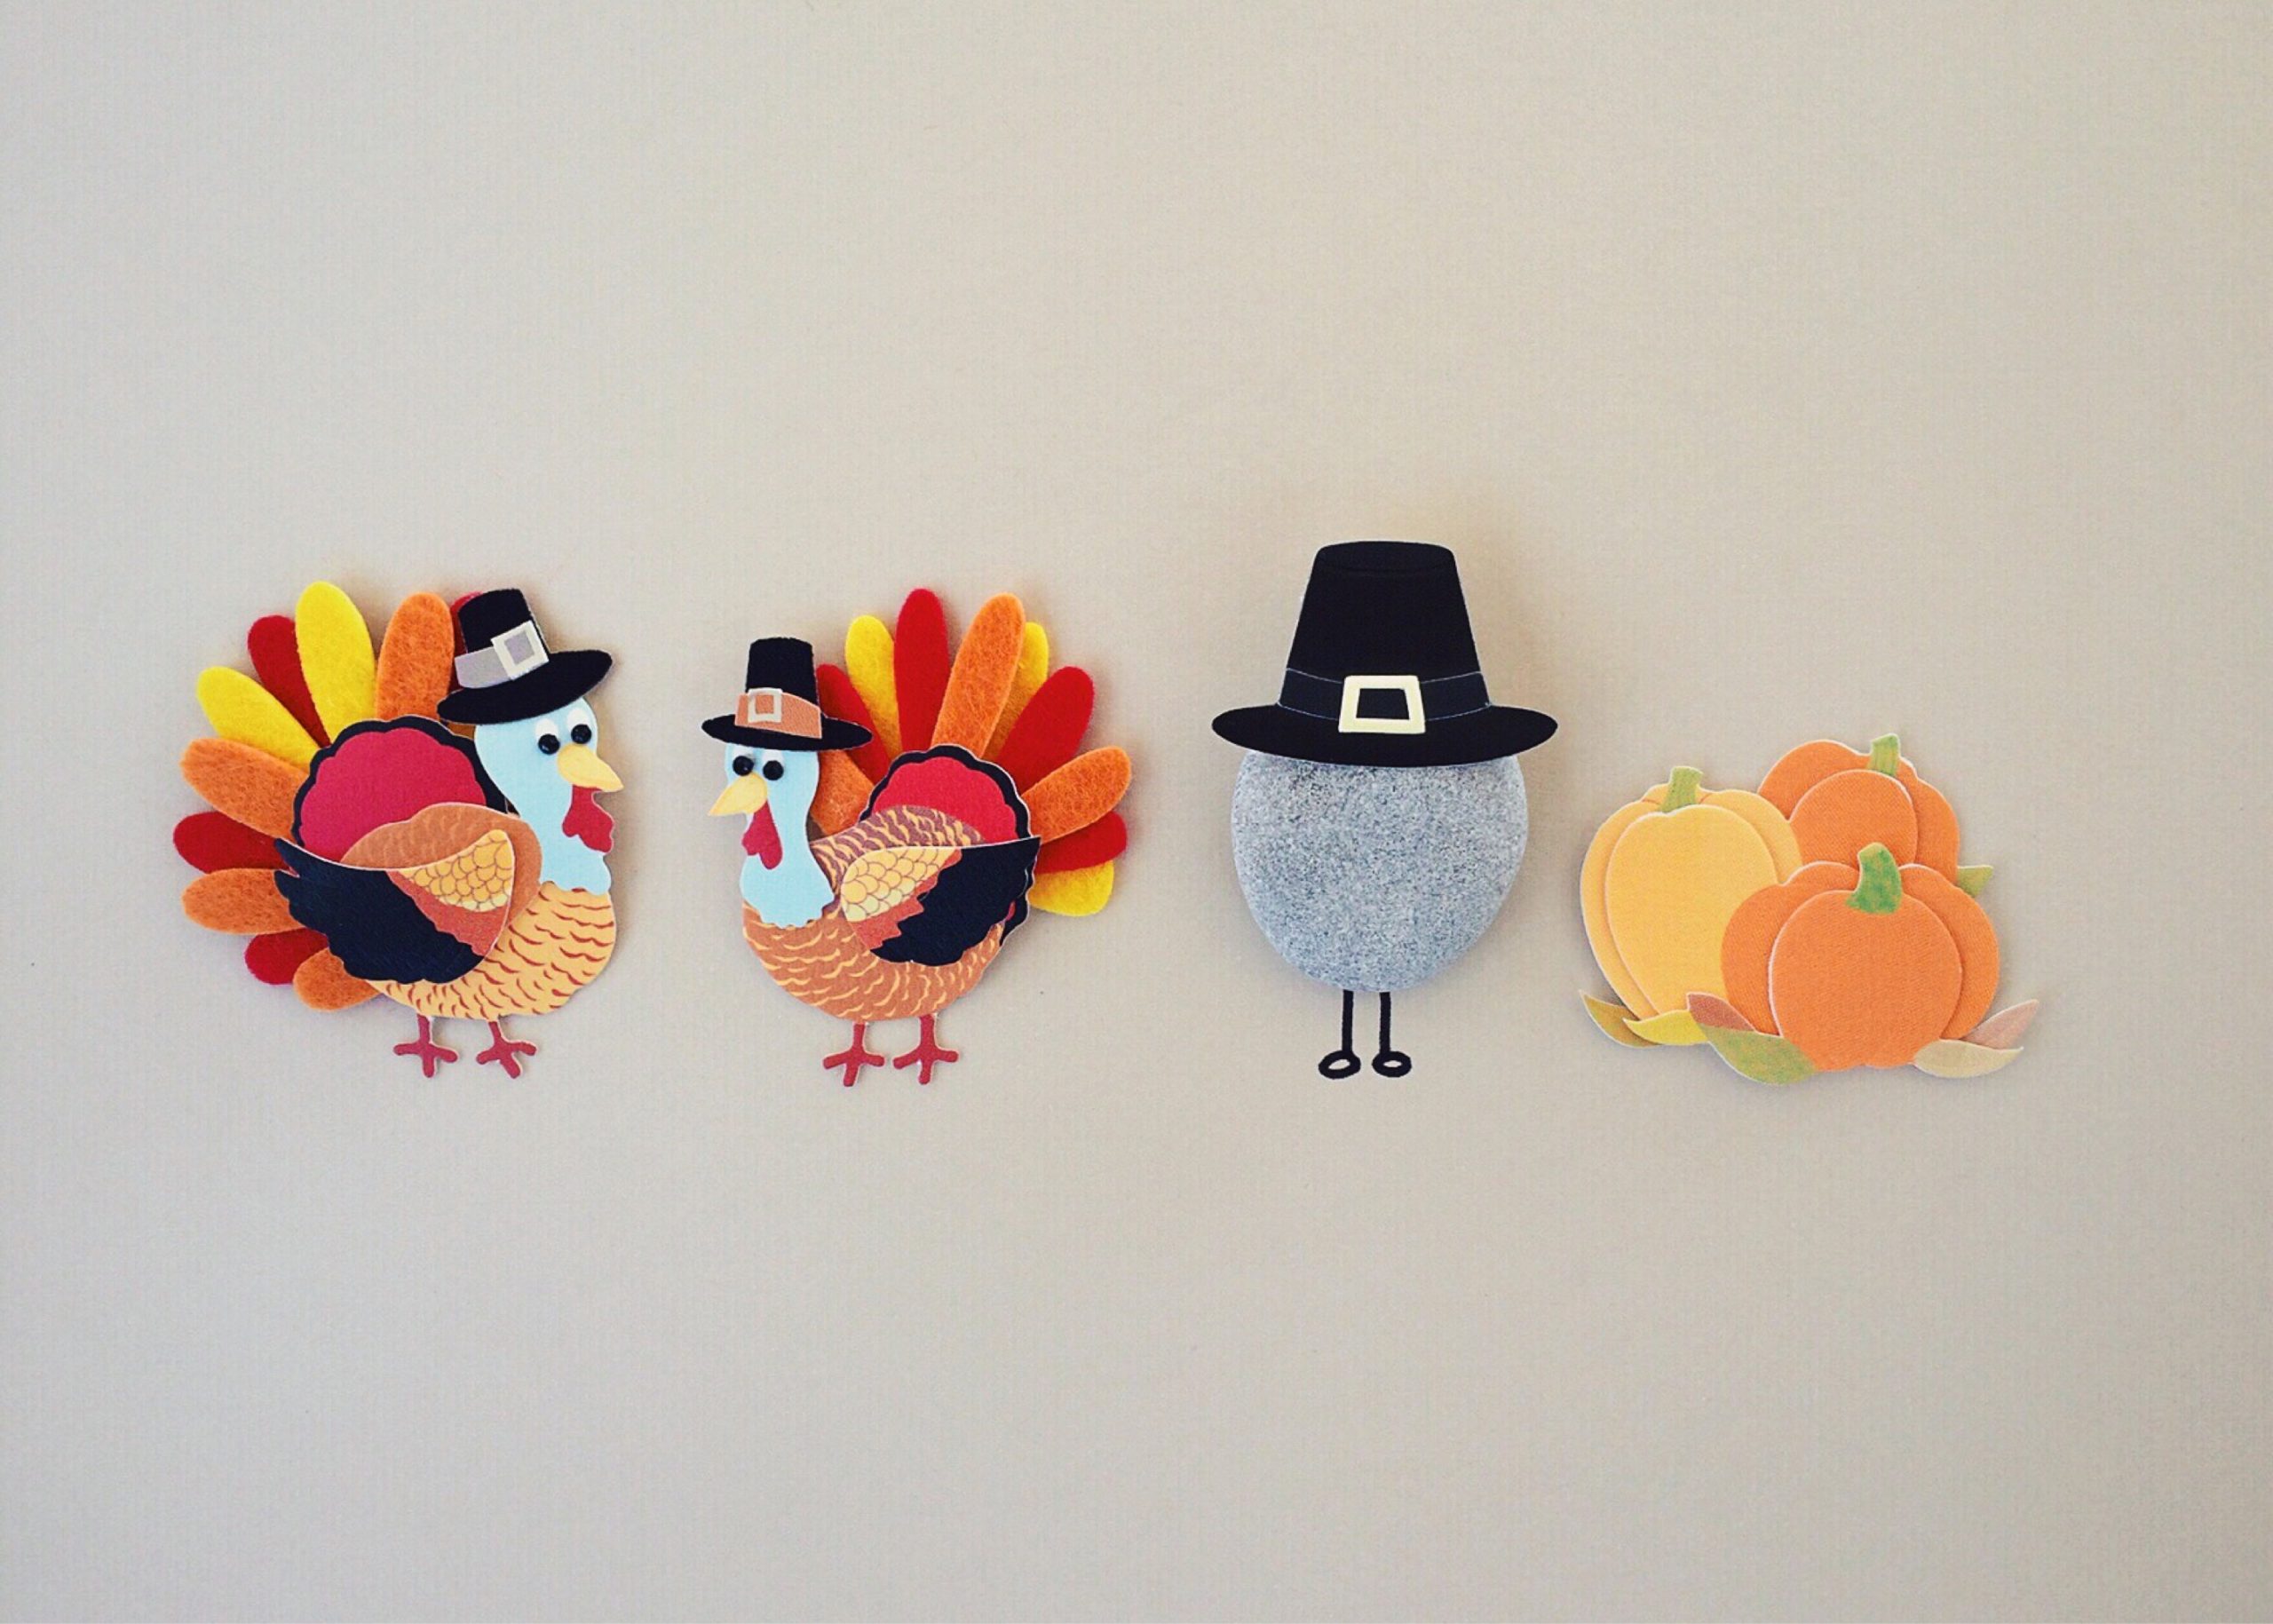 Happy Thanksgiving from Brier Creek Orthodontics